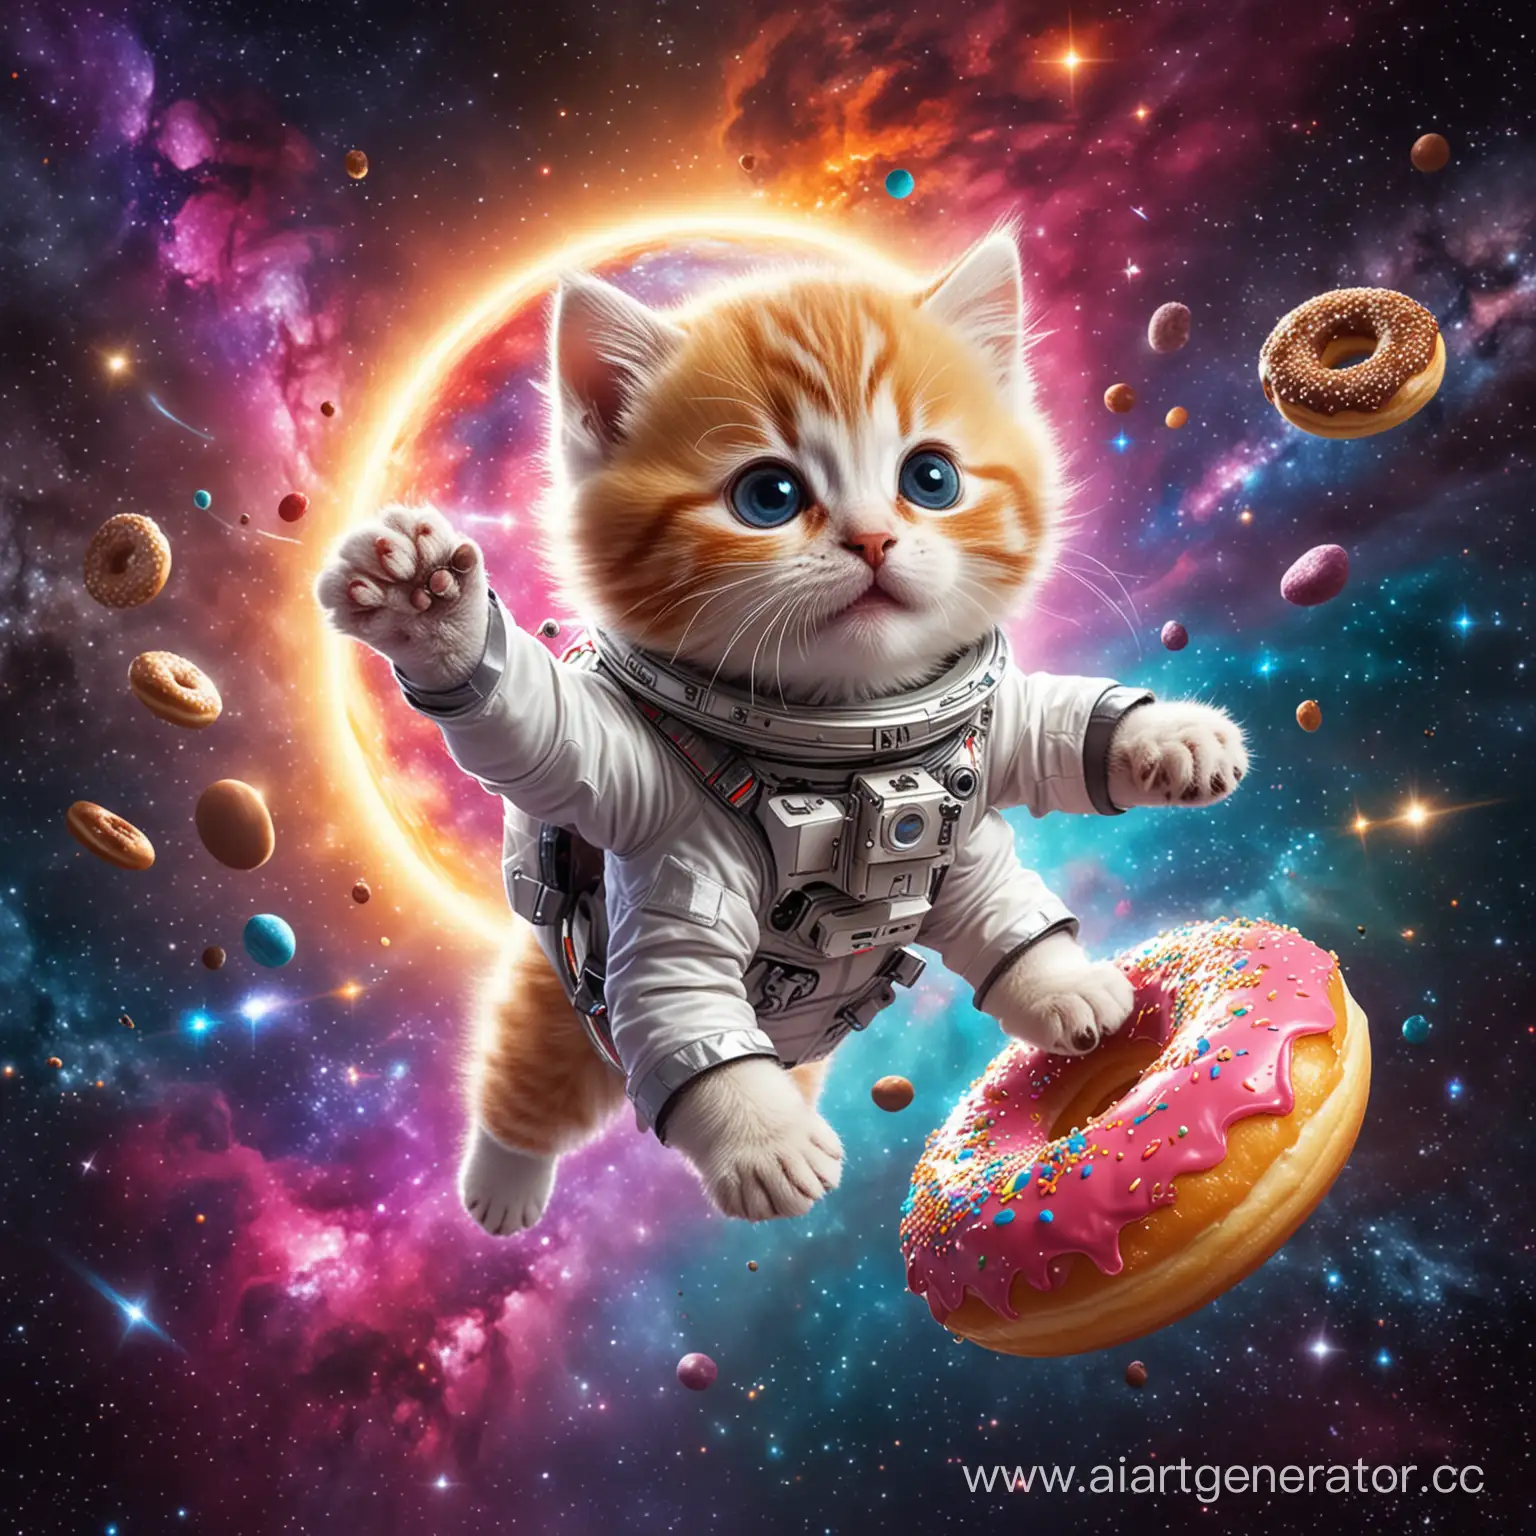 Adorable-Kitten-Astronaut-Riding-a-Glowing-Donut-in-Space